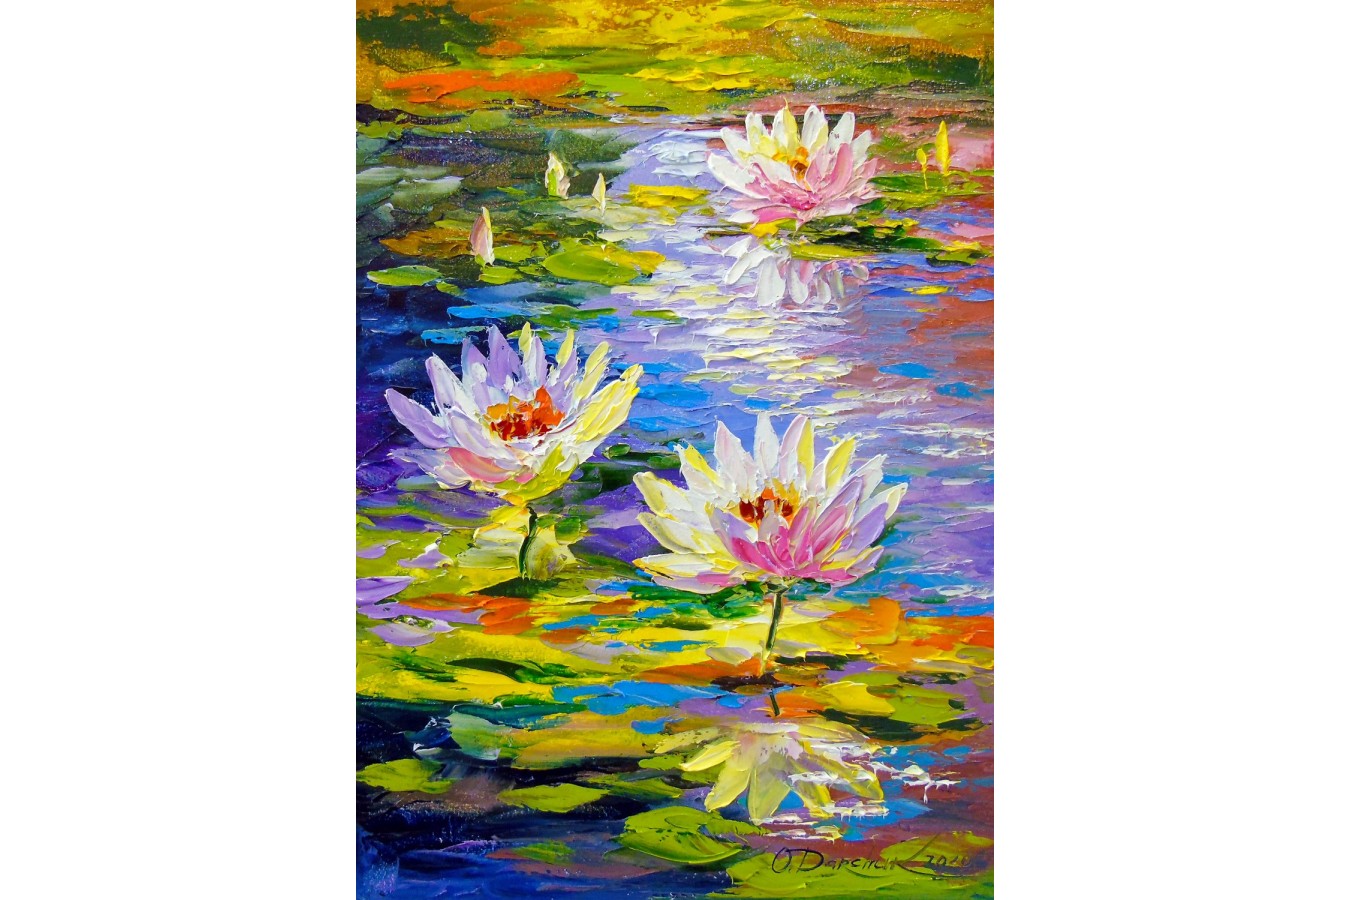 Puzzle 1000 piese ENJOY - Water Lilies in the Pond (Enjoy-1847)